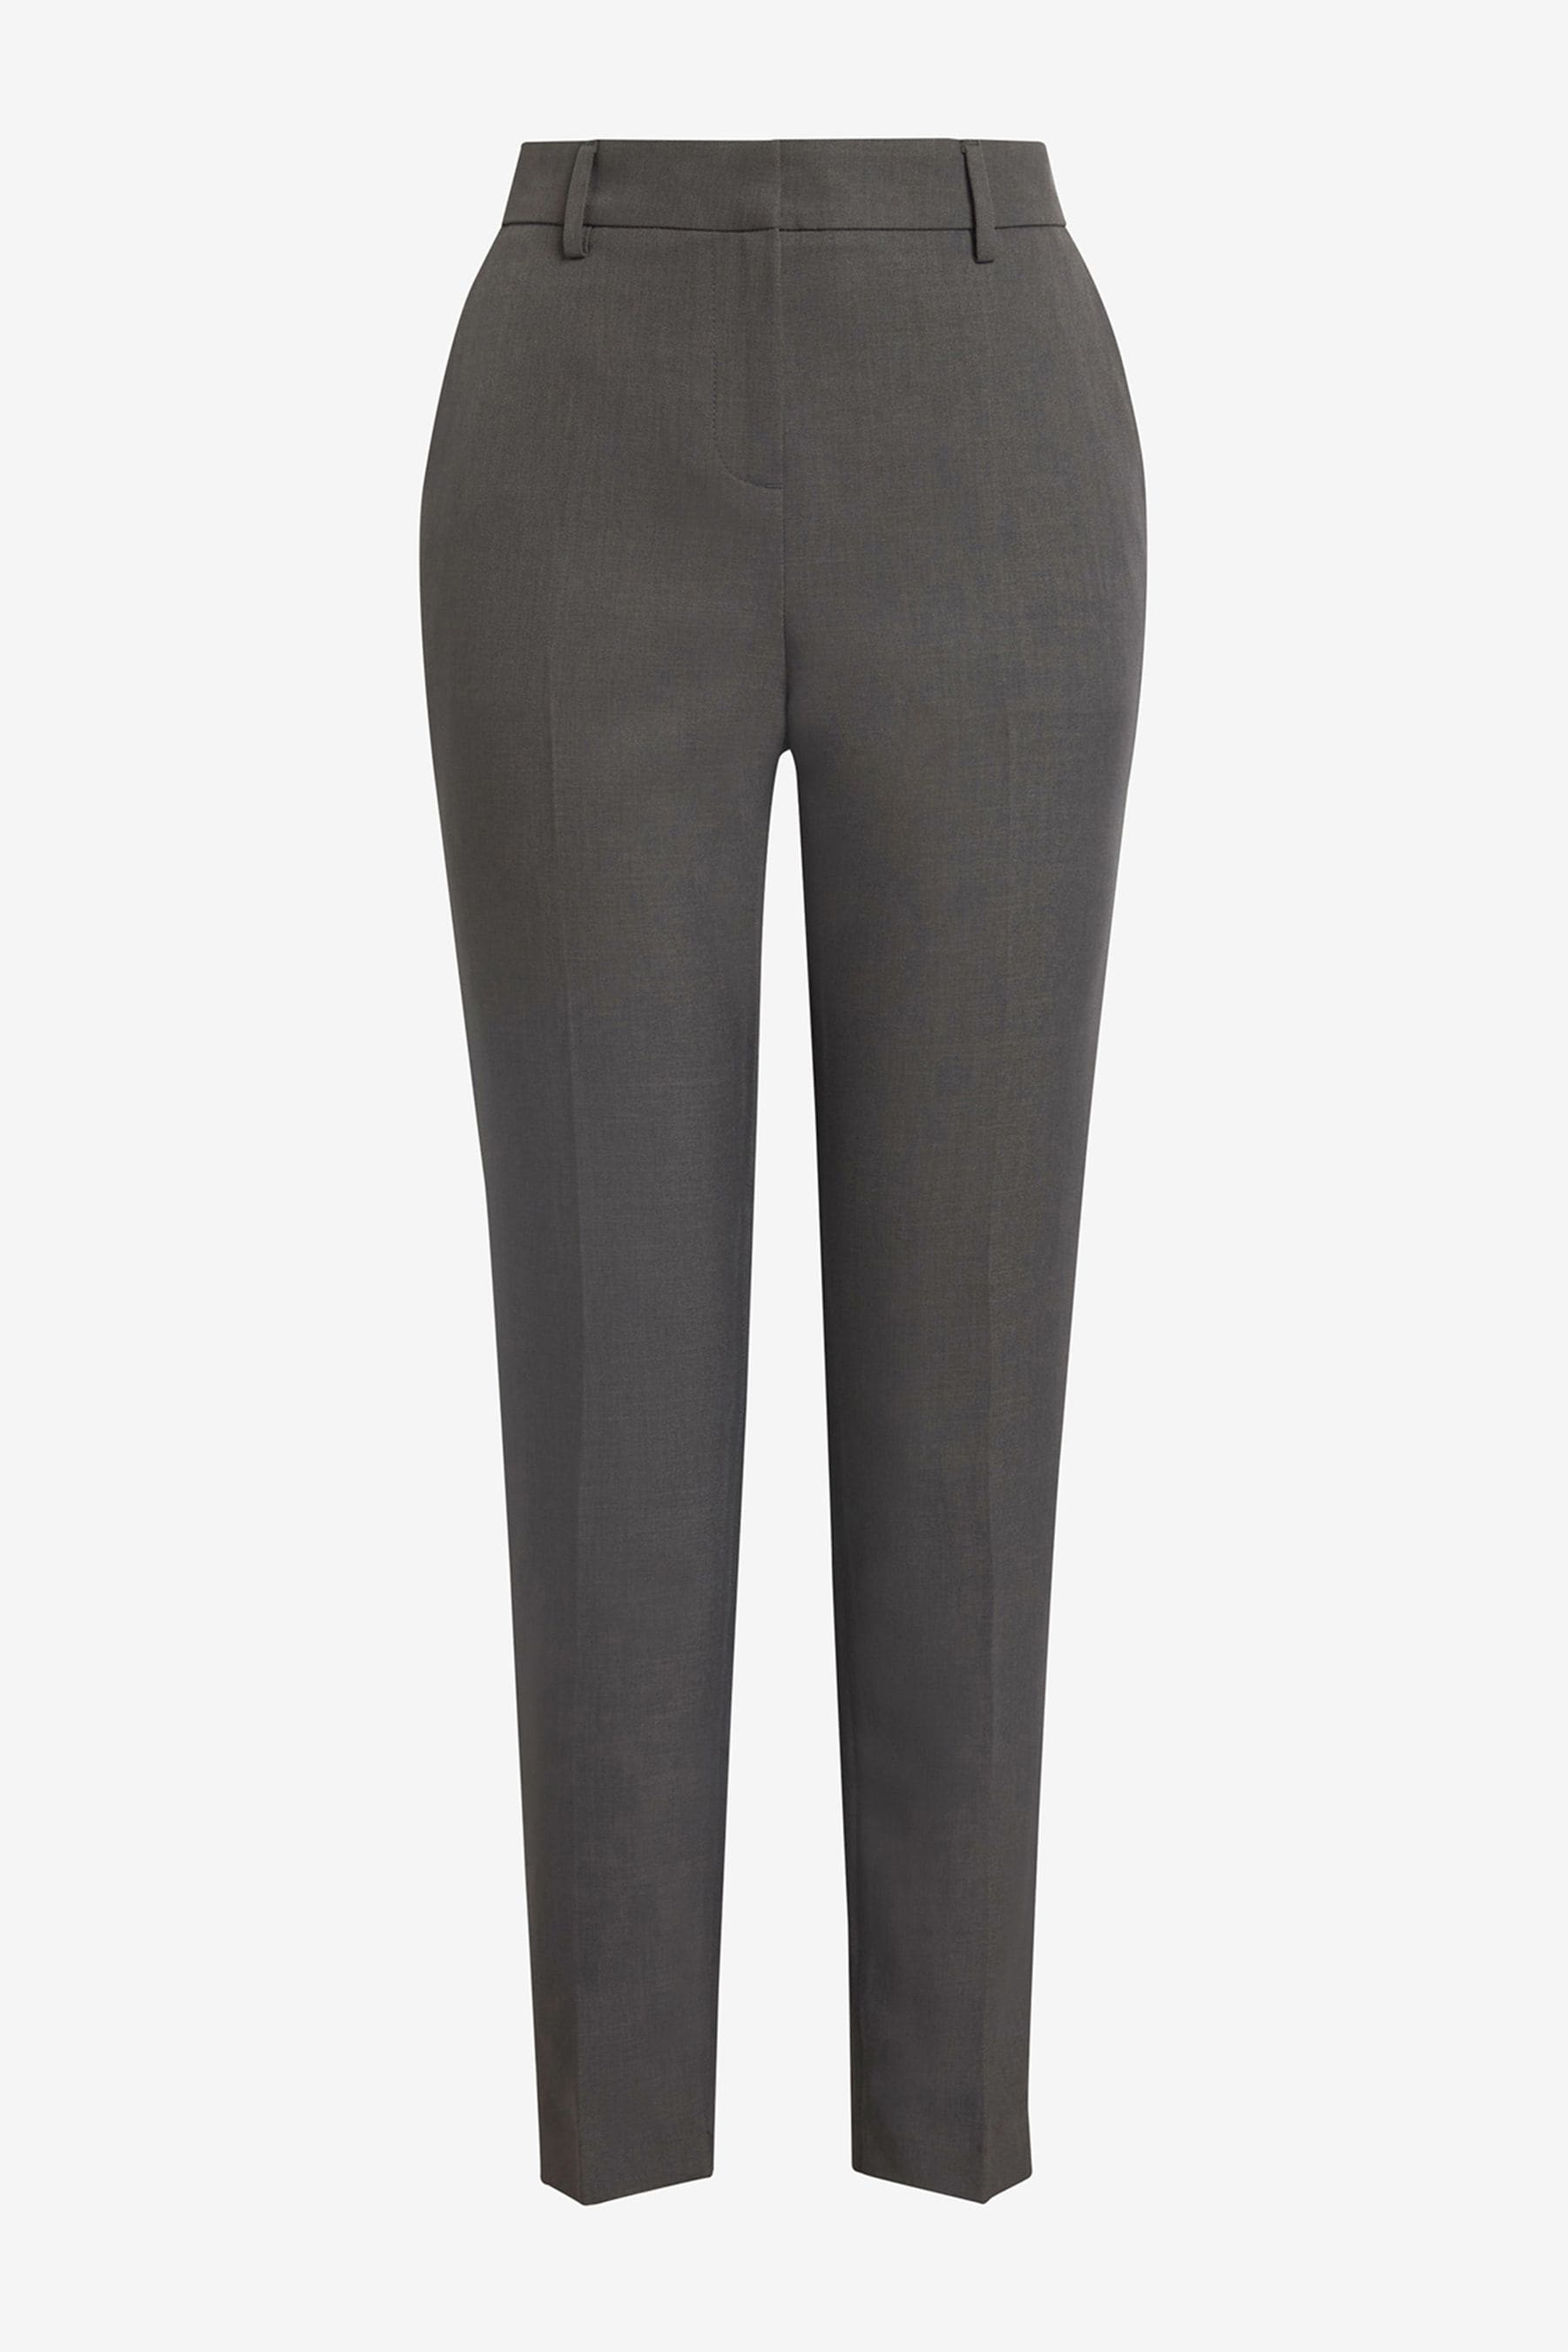 Buy Charcoal Grey Slim Trousers from the Next UK online shop